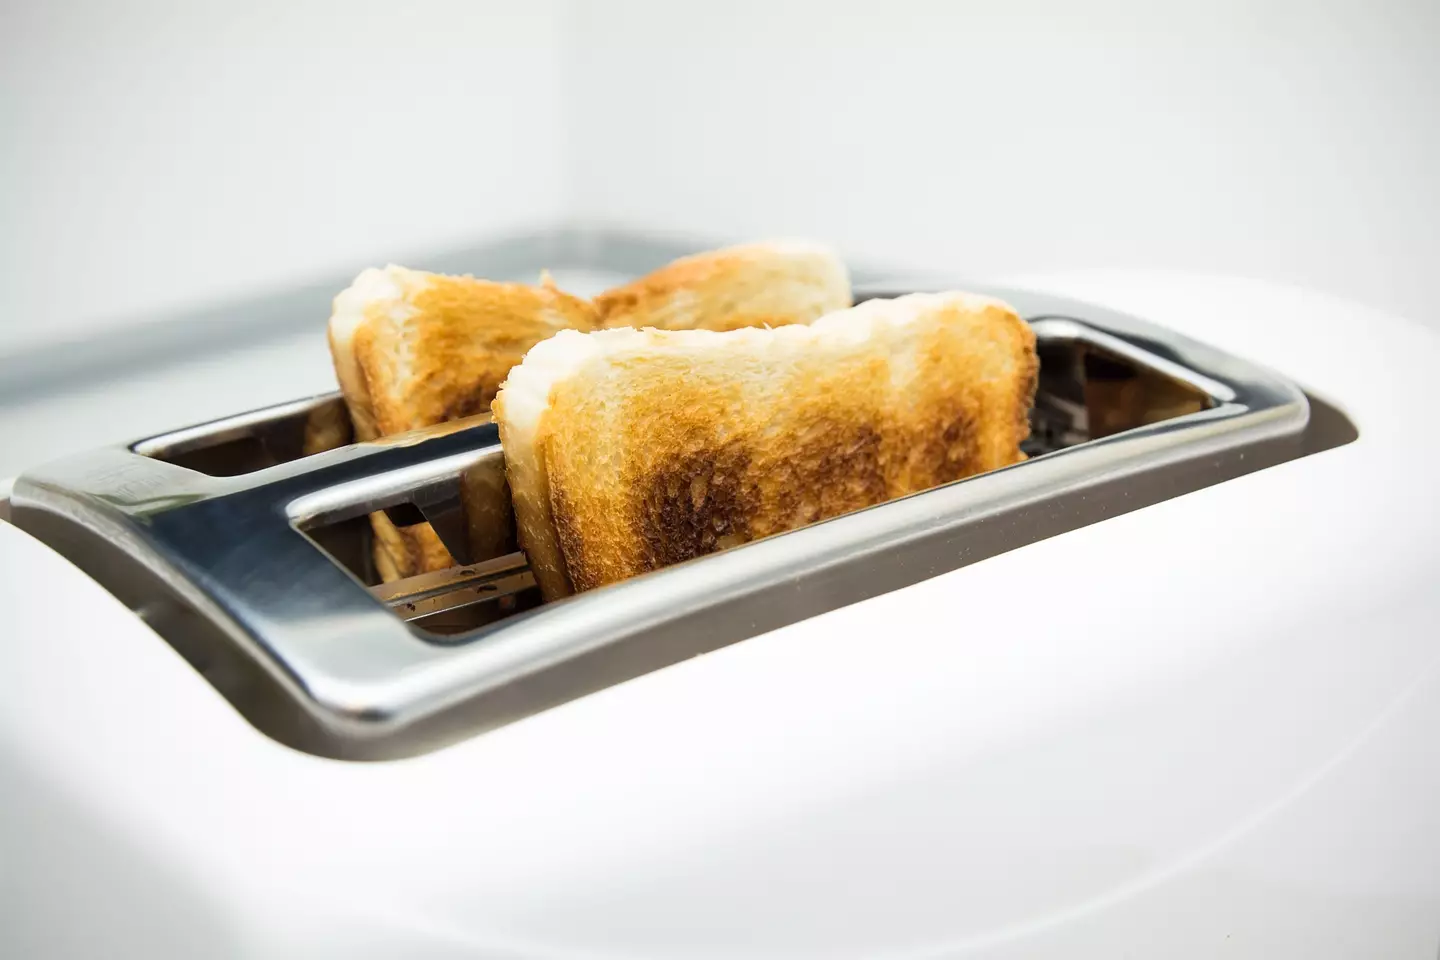 Did you know about the hidden compartment in a toaster?